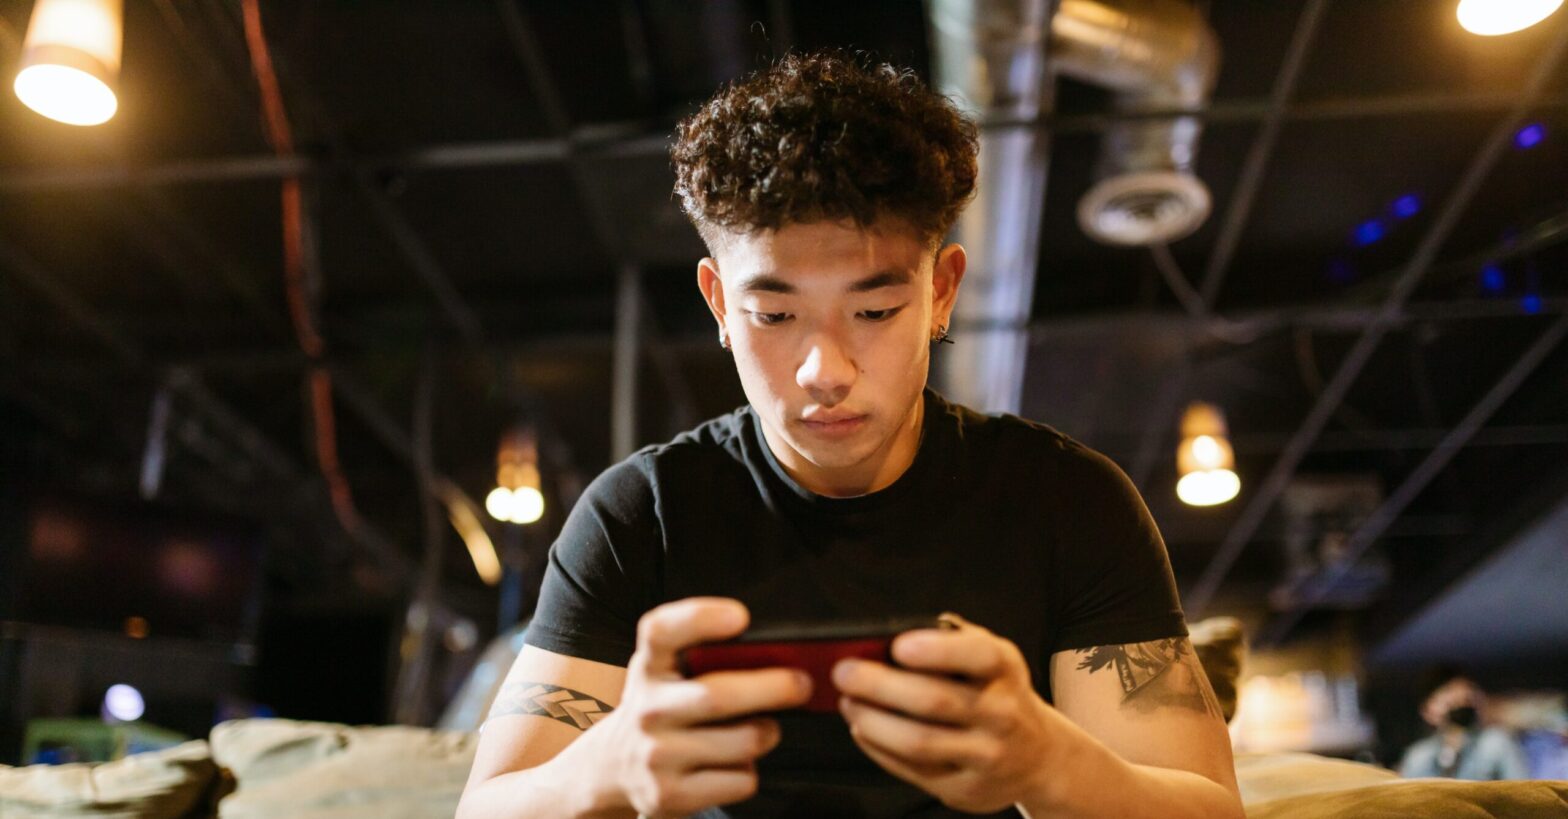 Man playing new game on smartphone